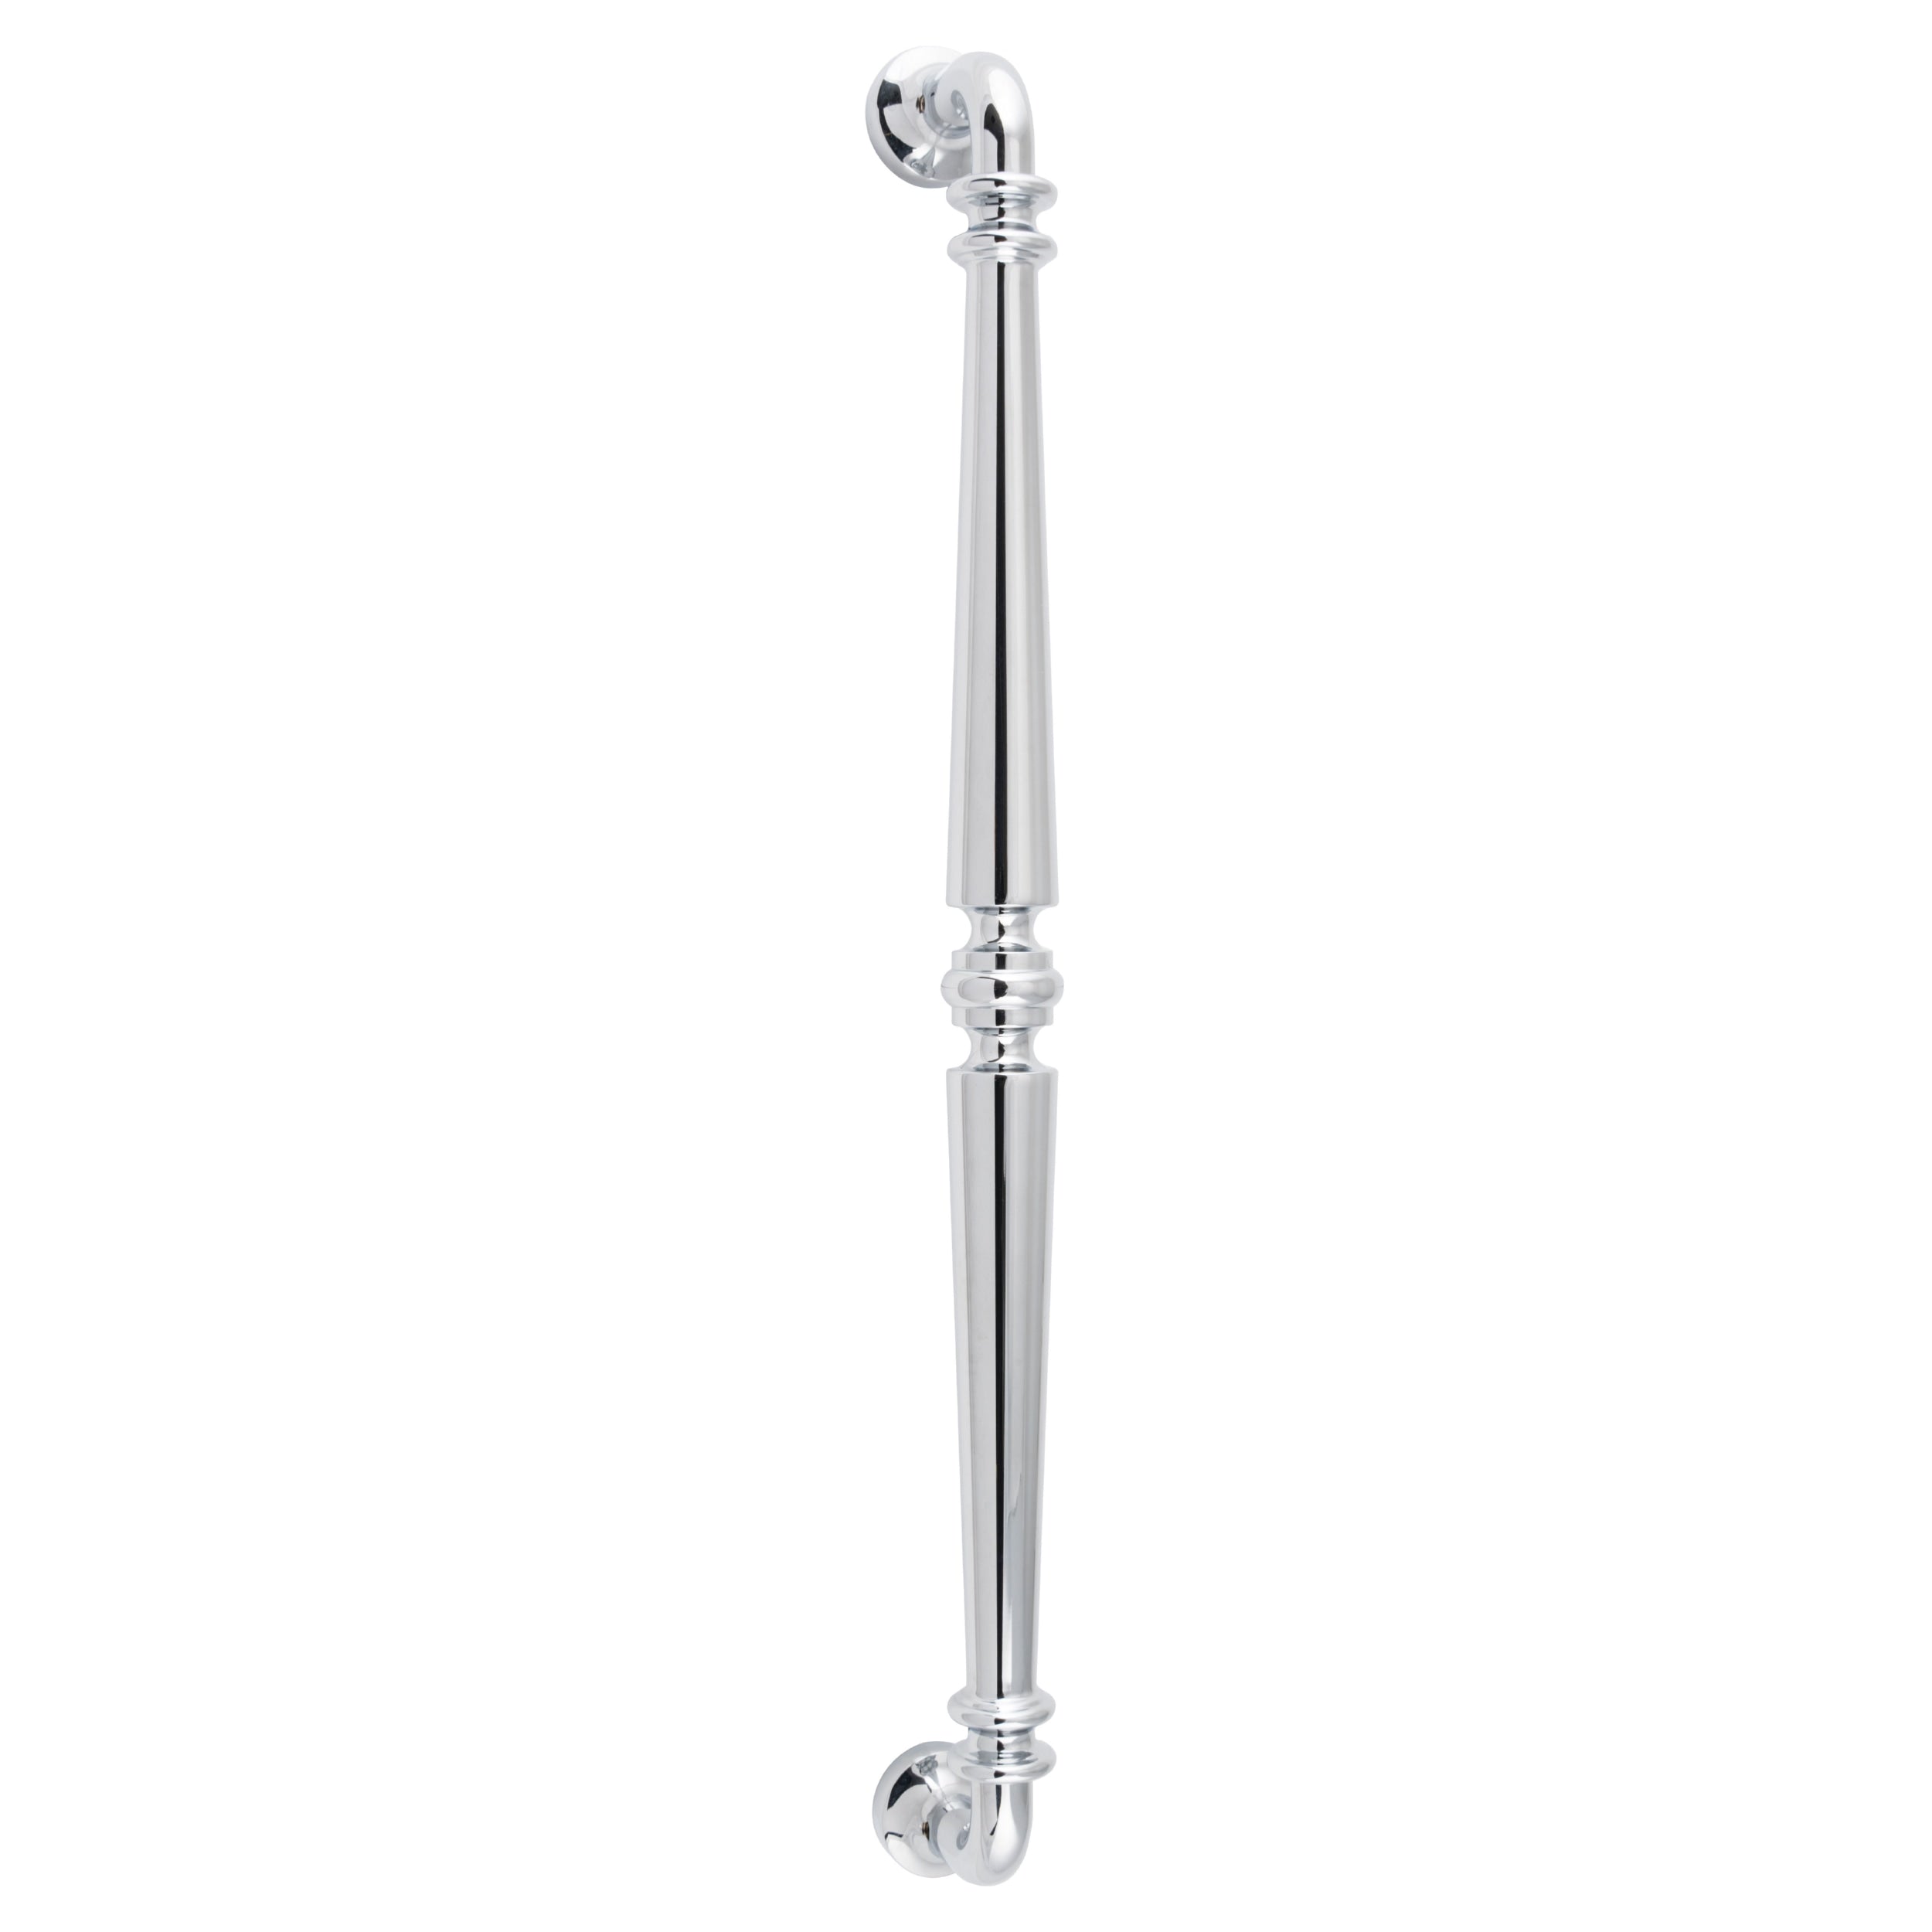 Iver Pull Handle Sarlat Polished Chrome 487mm